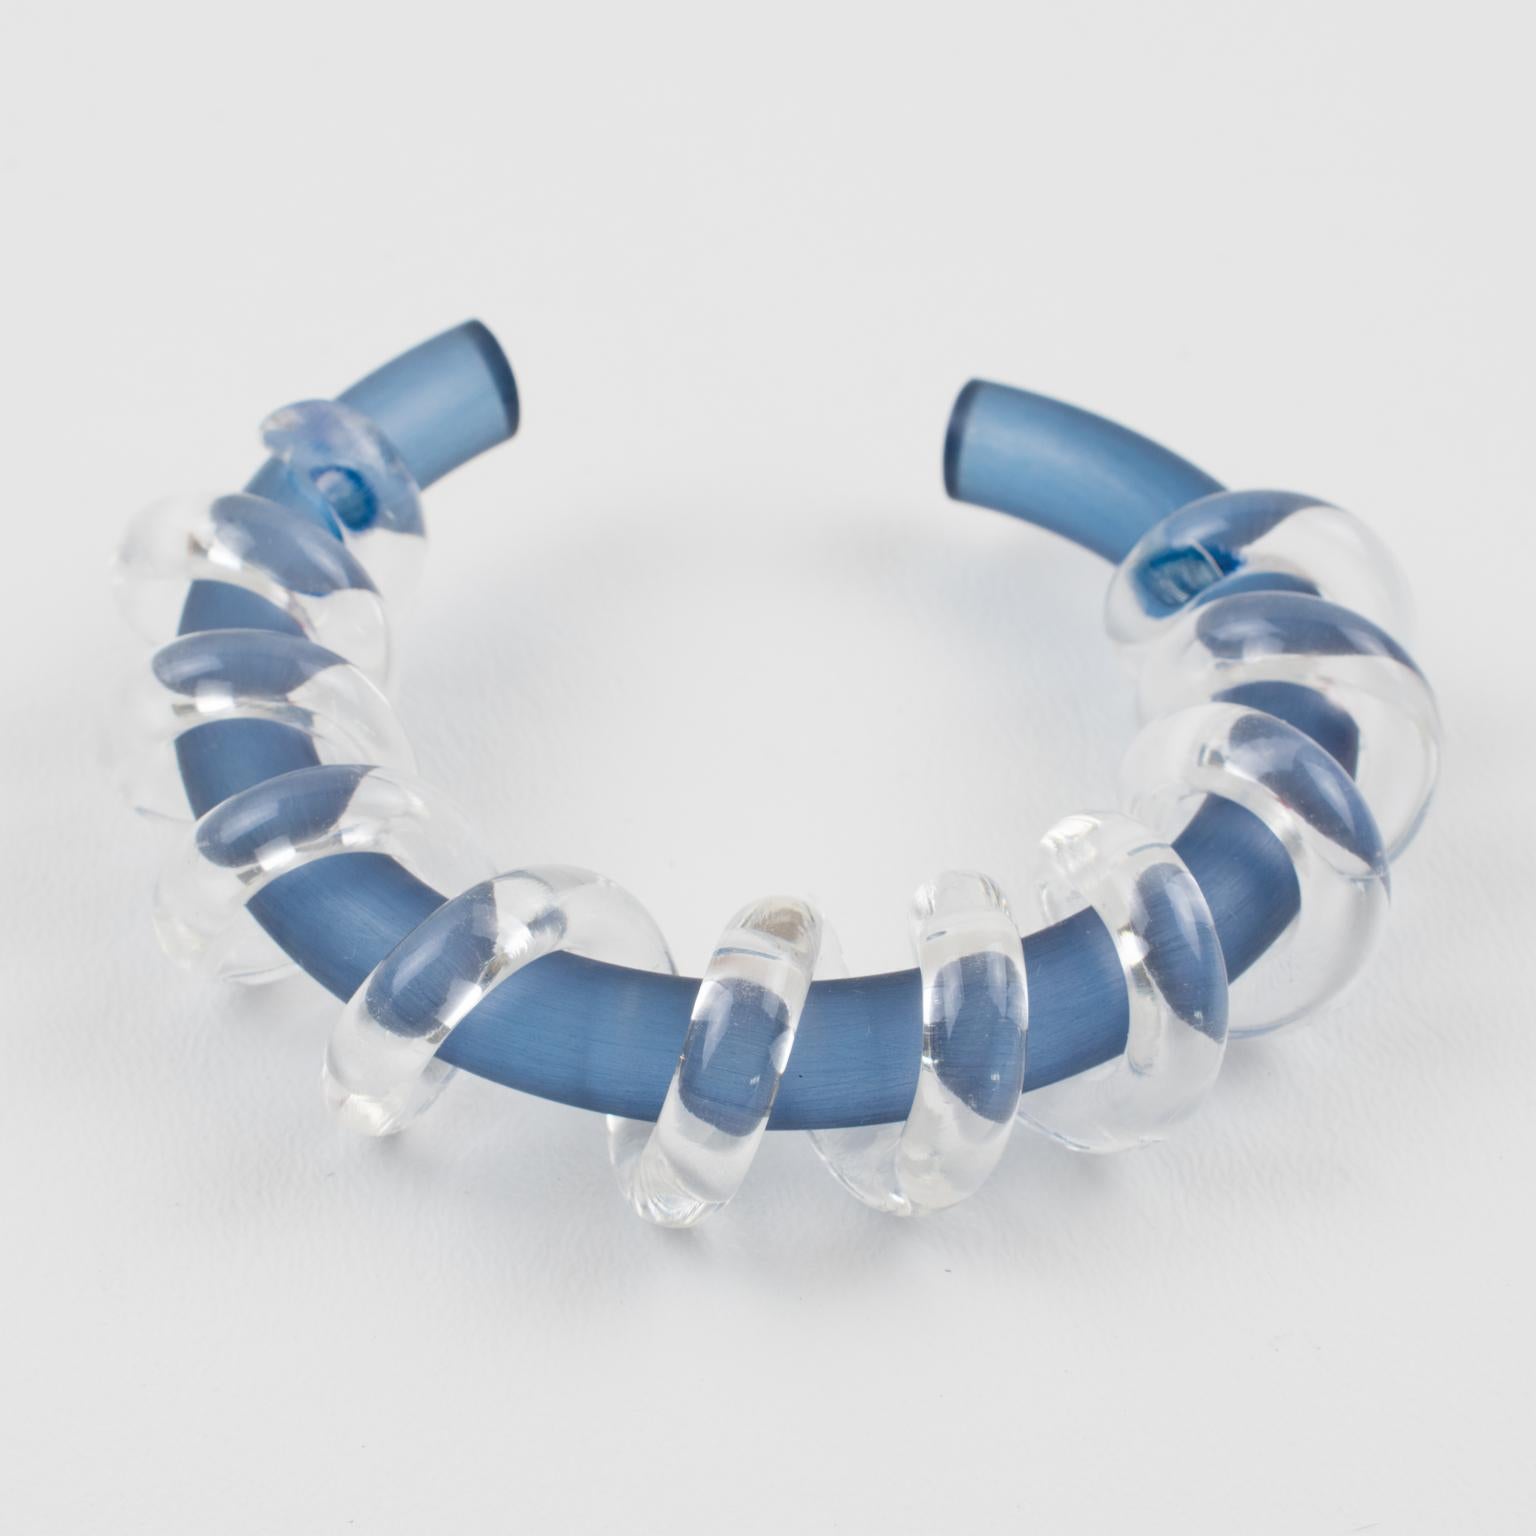 Lovely Judith Hendler Lucite or Acrylic cuff bracelet bangle from her collection 